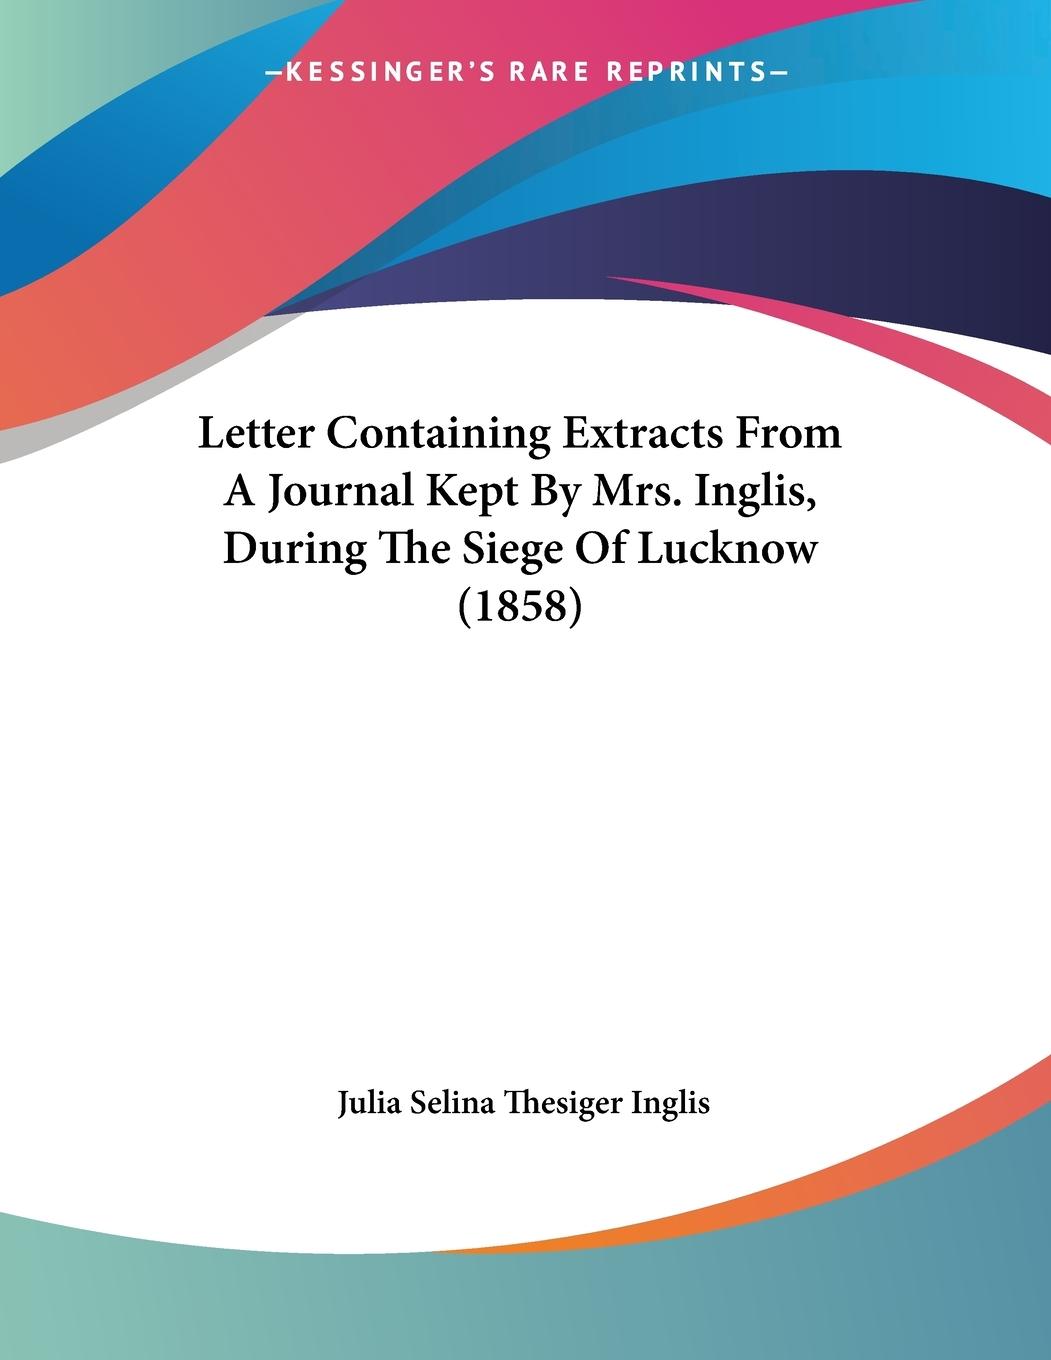 Letter Containing Extracts From A Journal Kept By Mrs. Inglis, During The Siege Of Lucknow (1858) - Inglis, Julia Selina Thesiger